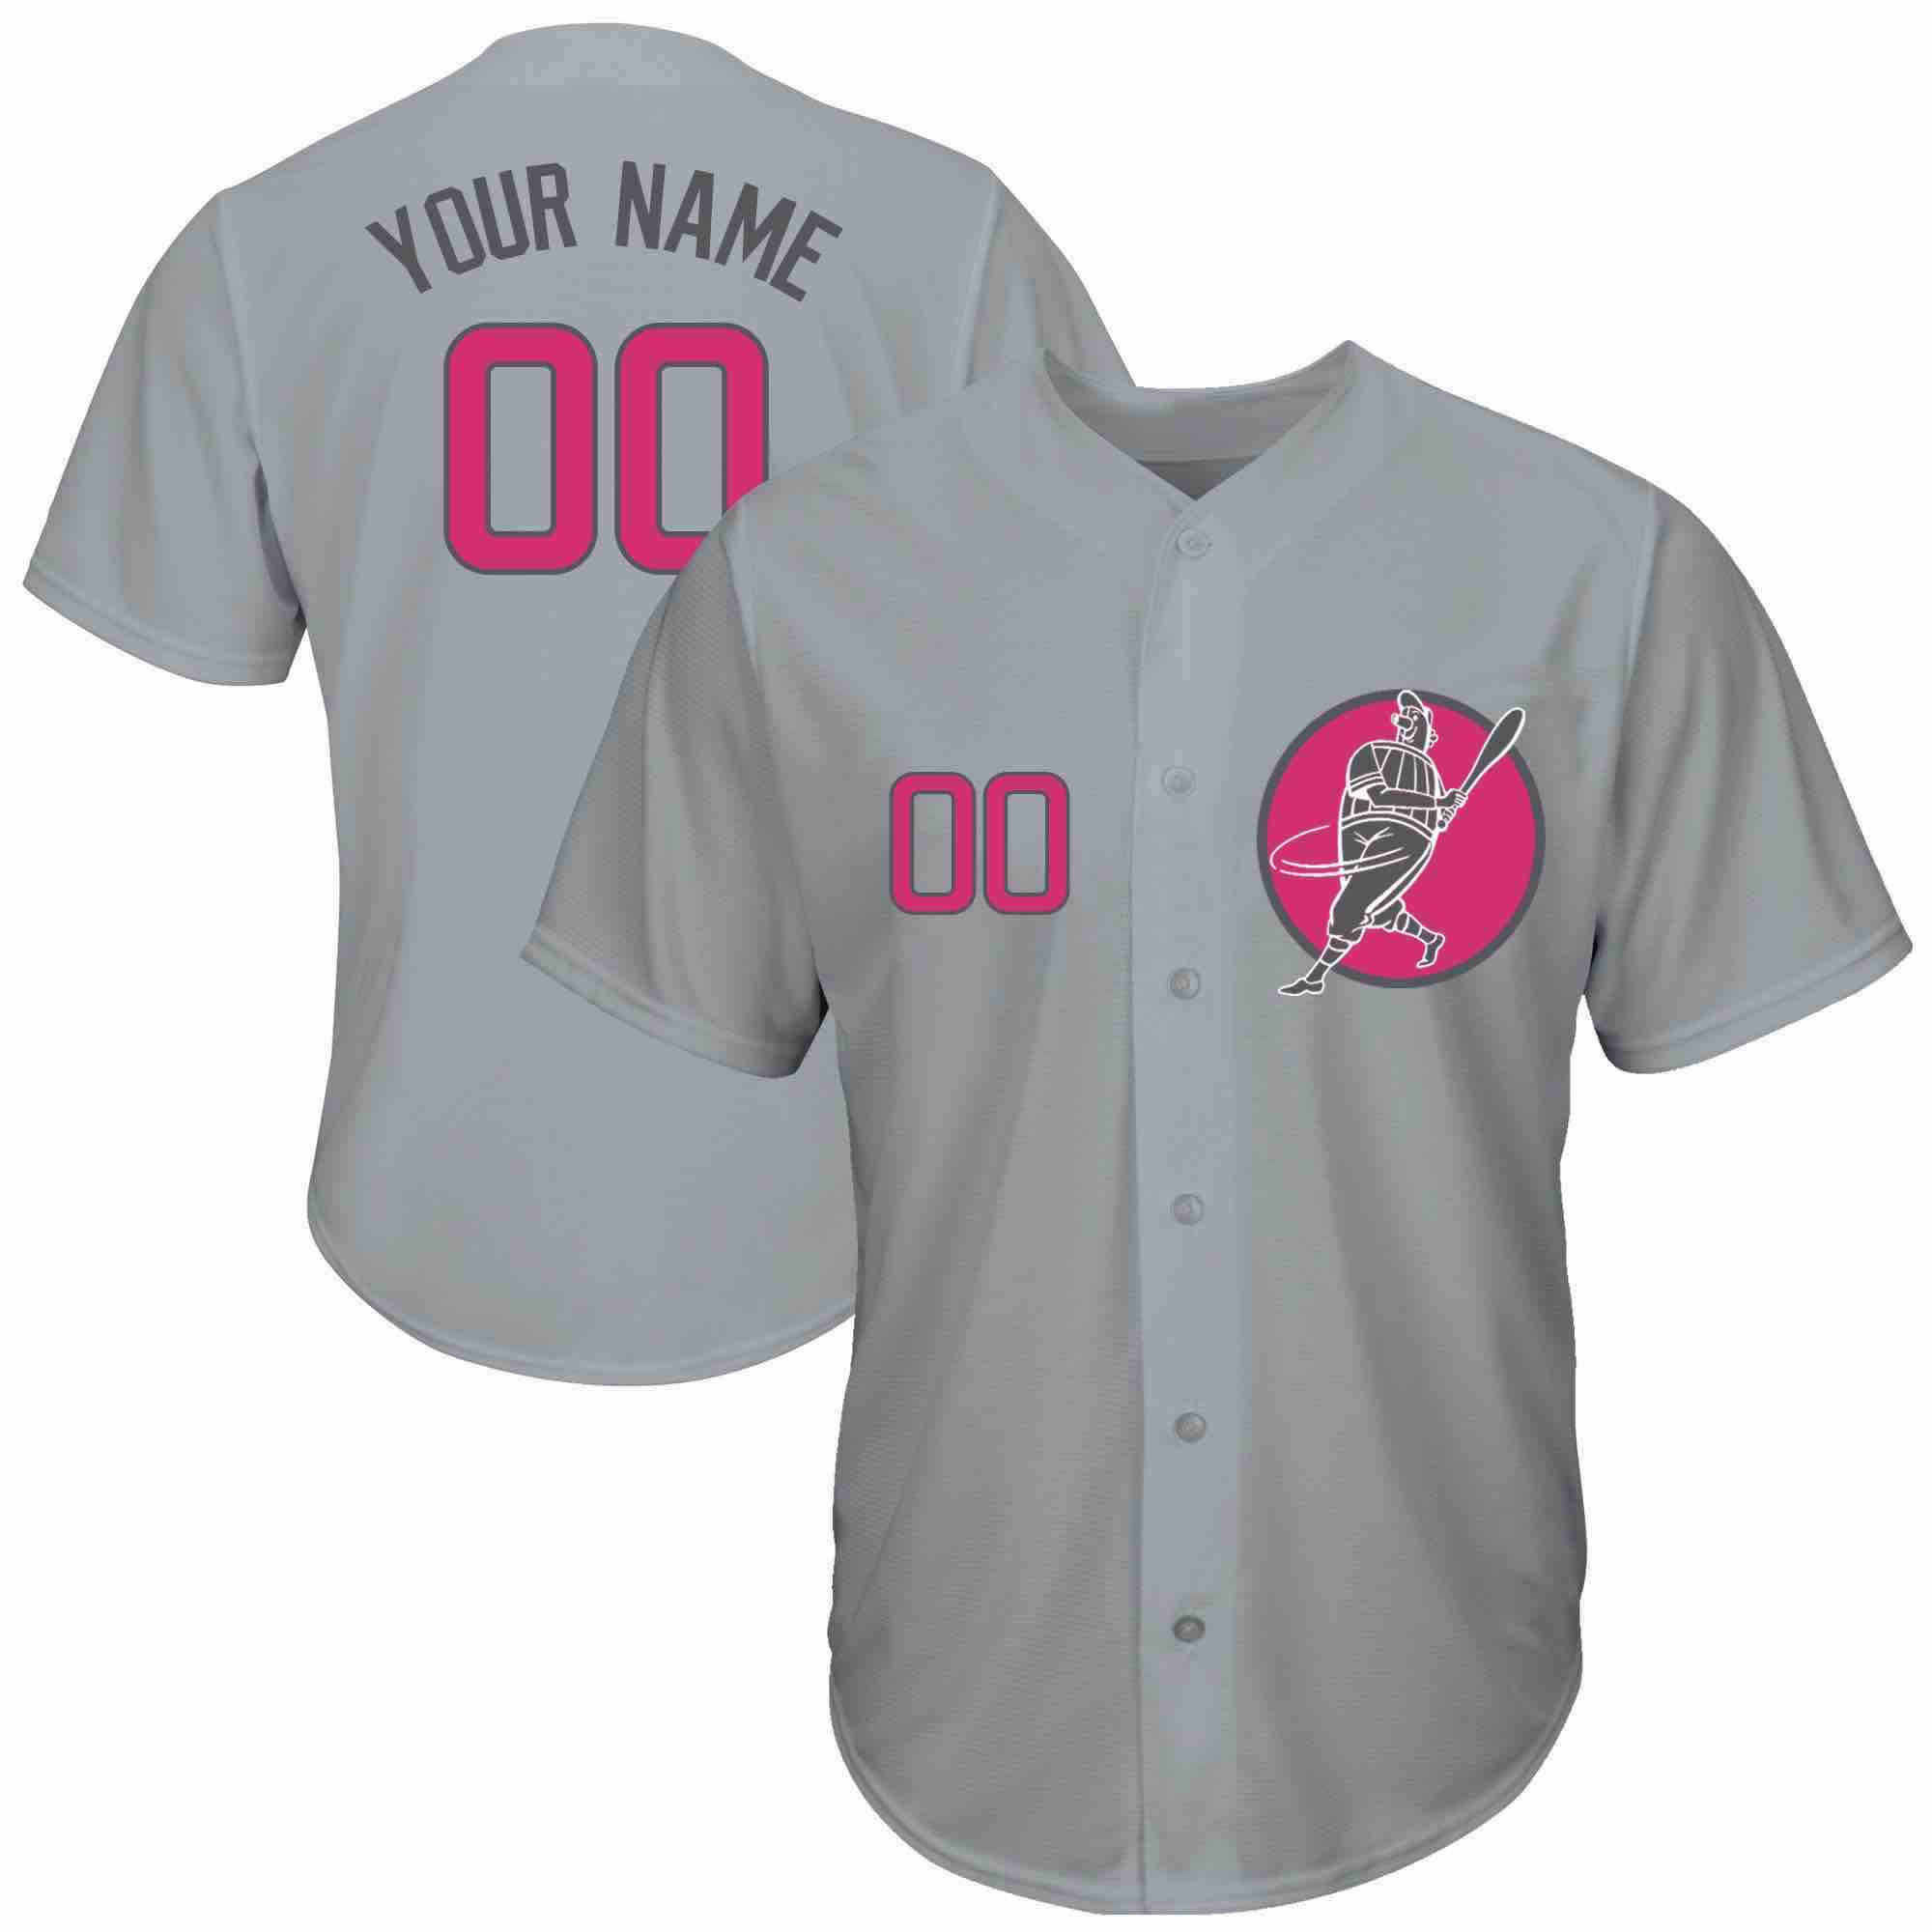 Womens MLB Chicago Cubs Personalized  Grey Jersey